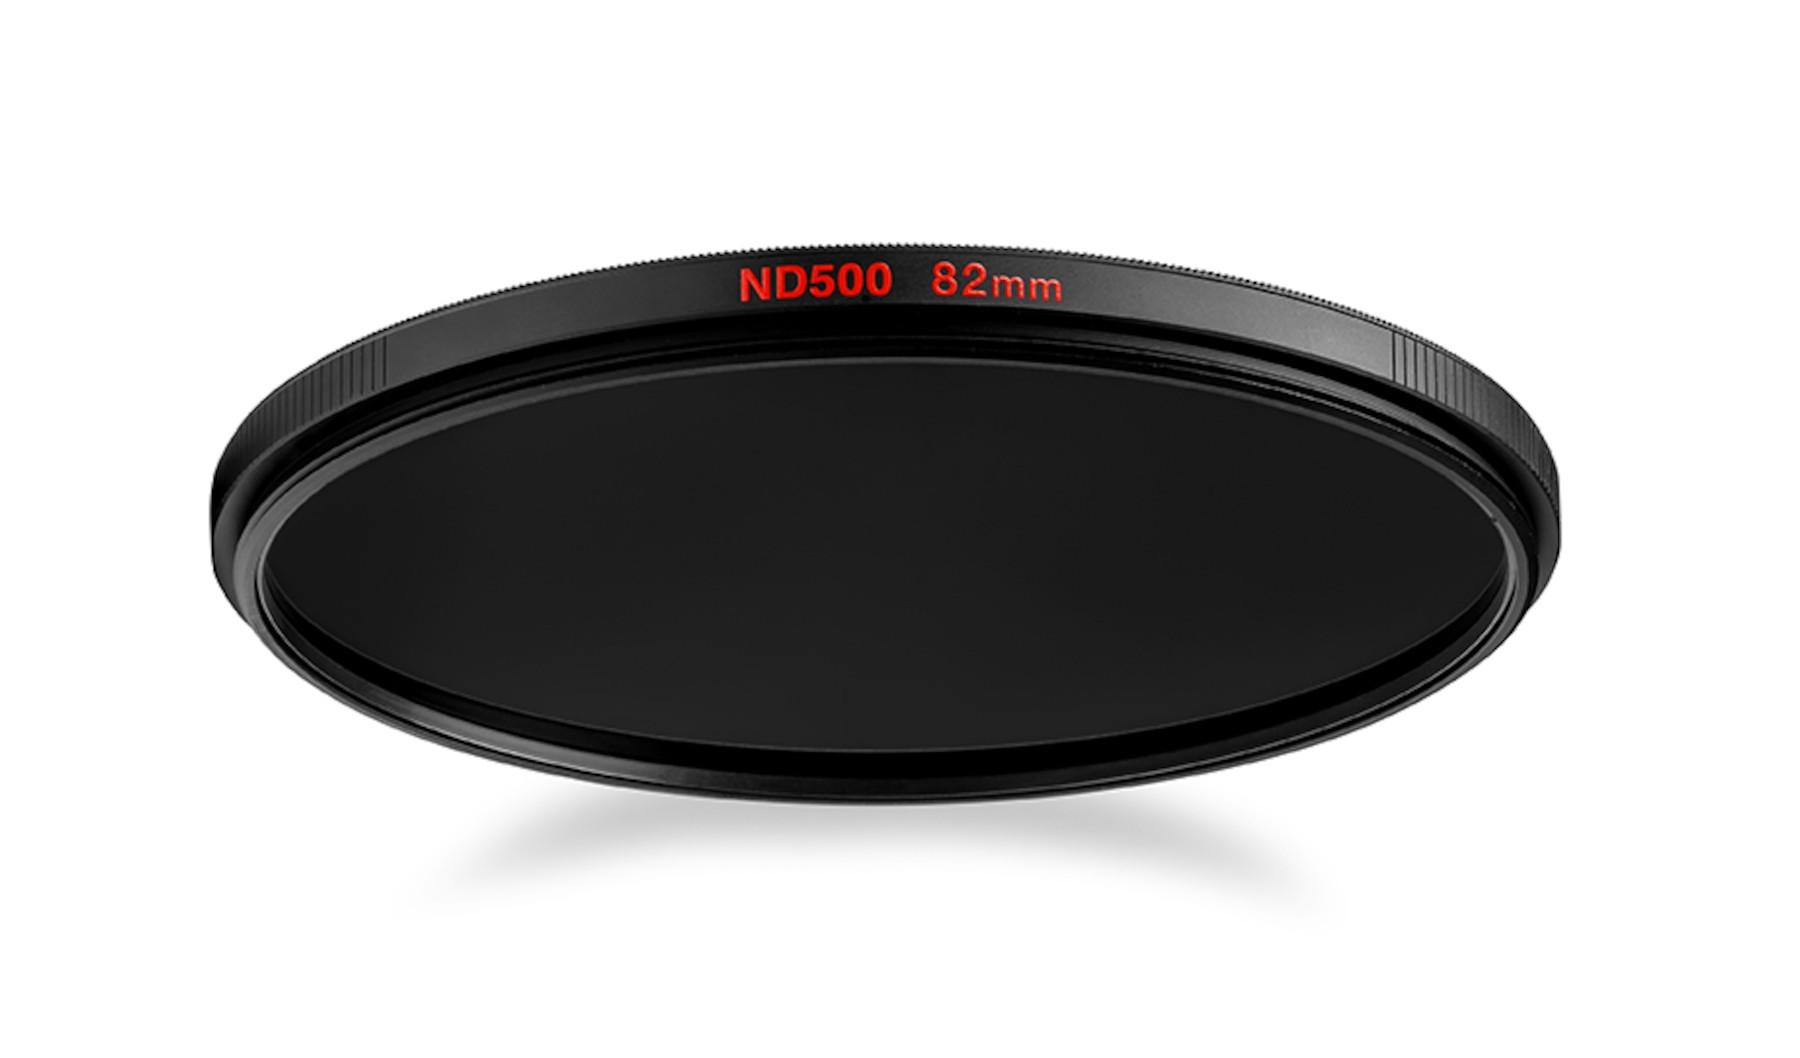 Manfrotto Circular ND500 lens filter with 9 stop of light loss 77mm (MFND500-77)